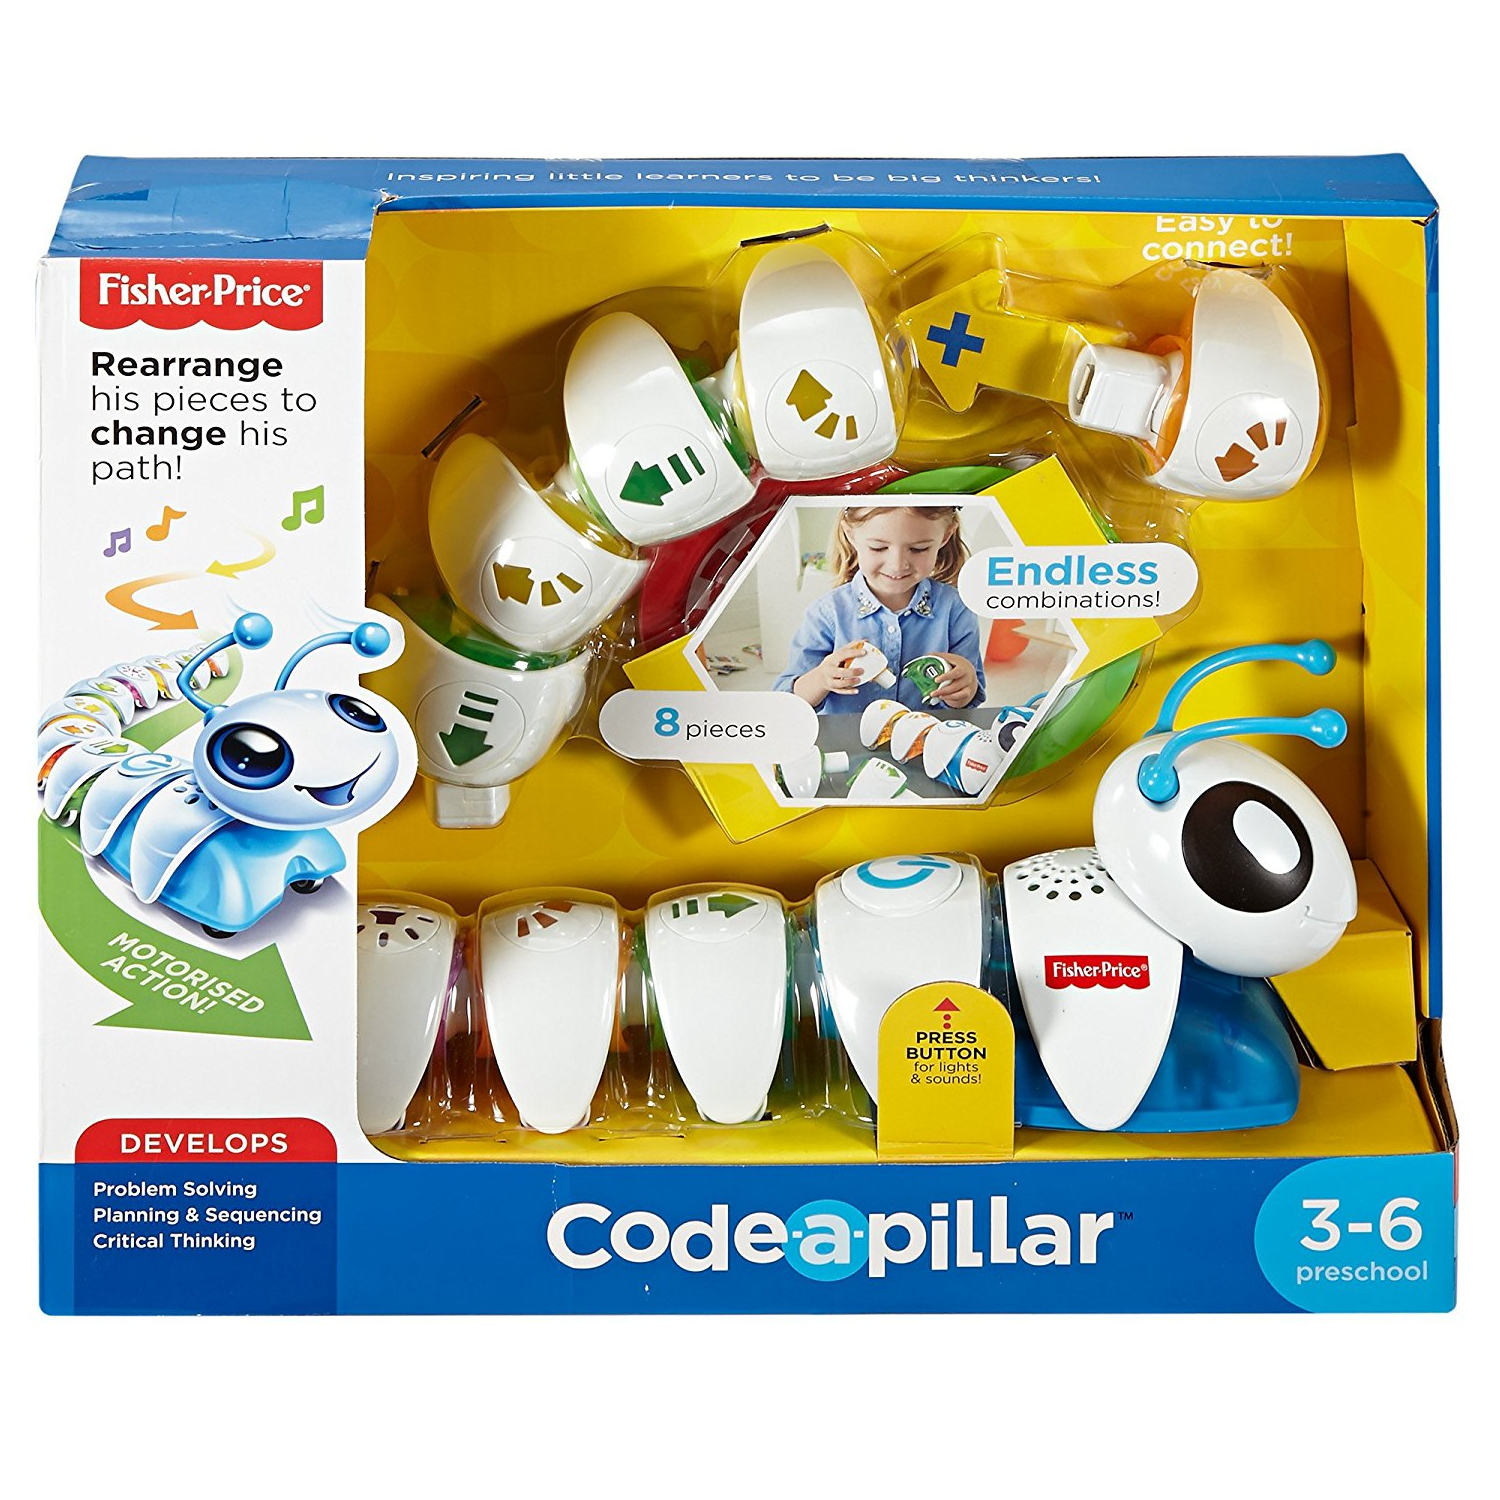 HOT! Fisher Price Think & Learn Code-A-Pillar Only $39.27! Popular Toy for 2016!